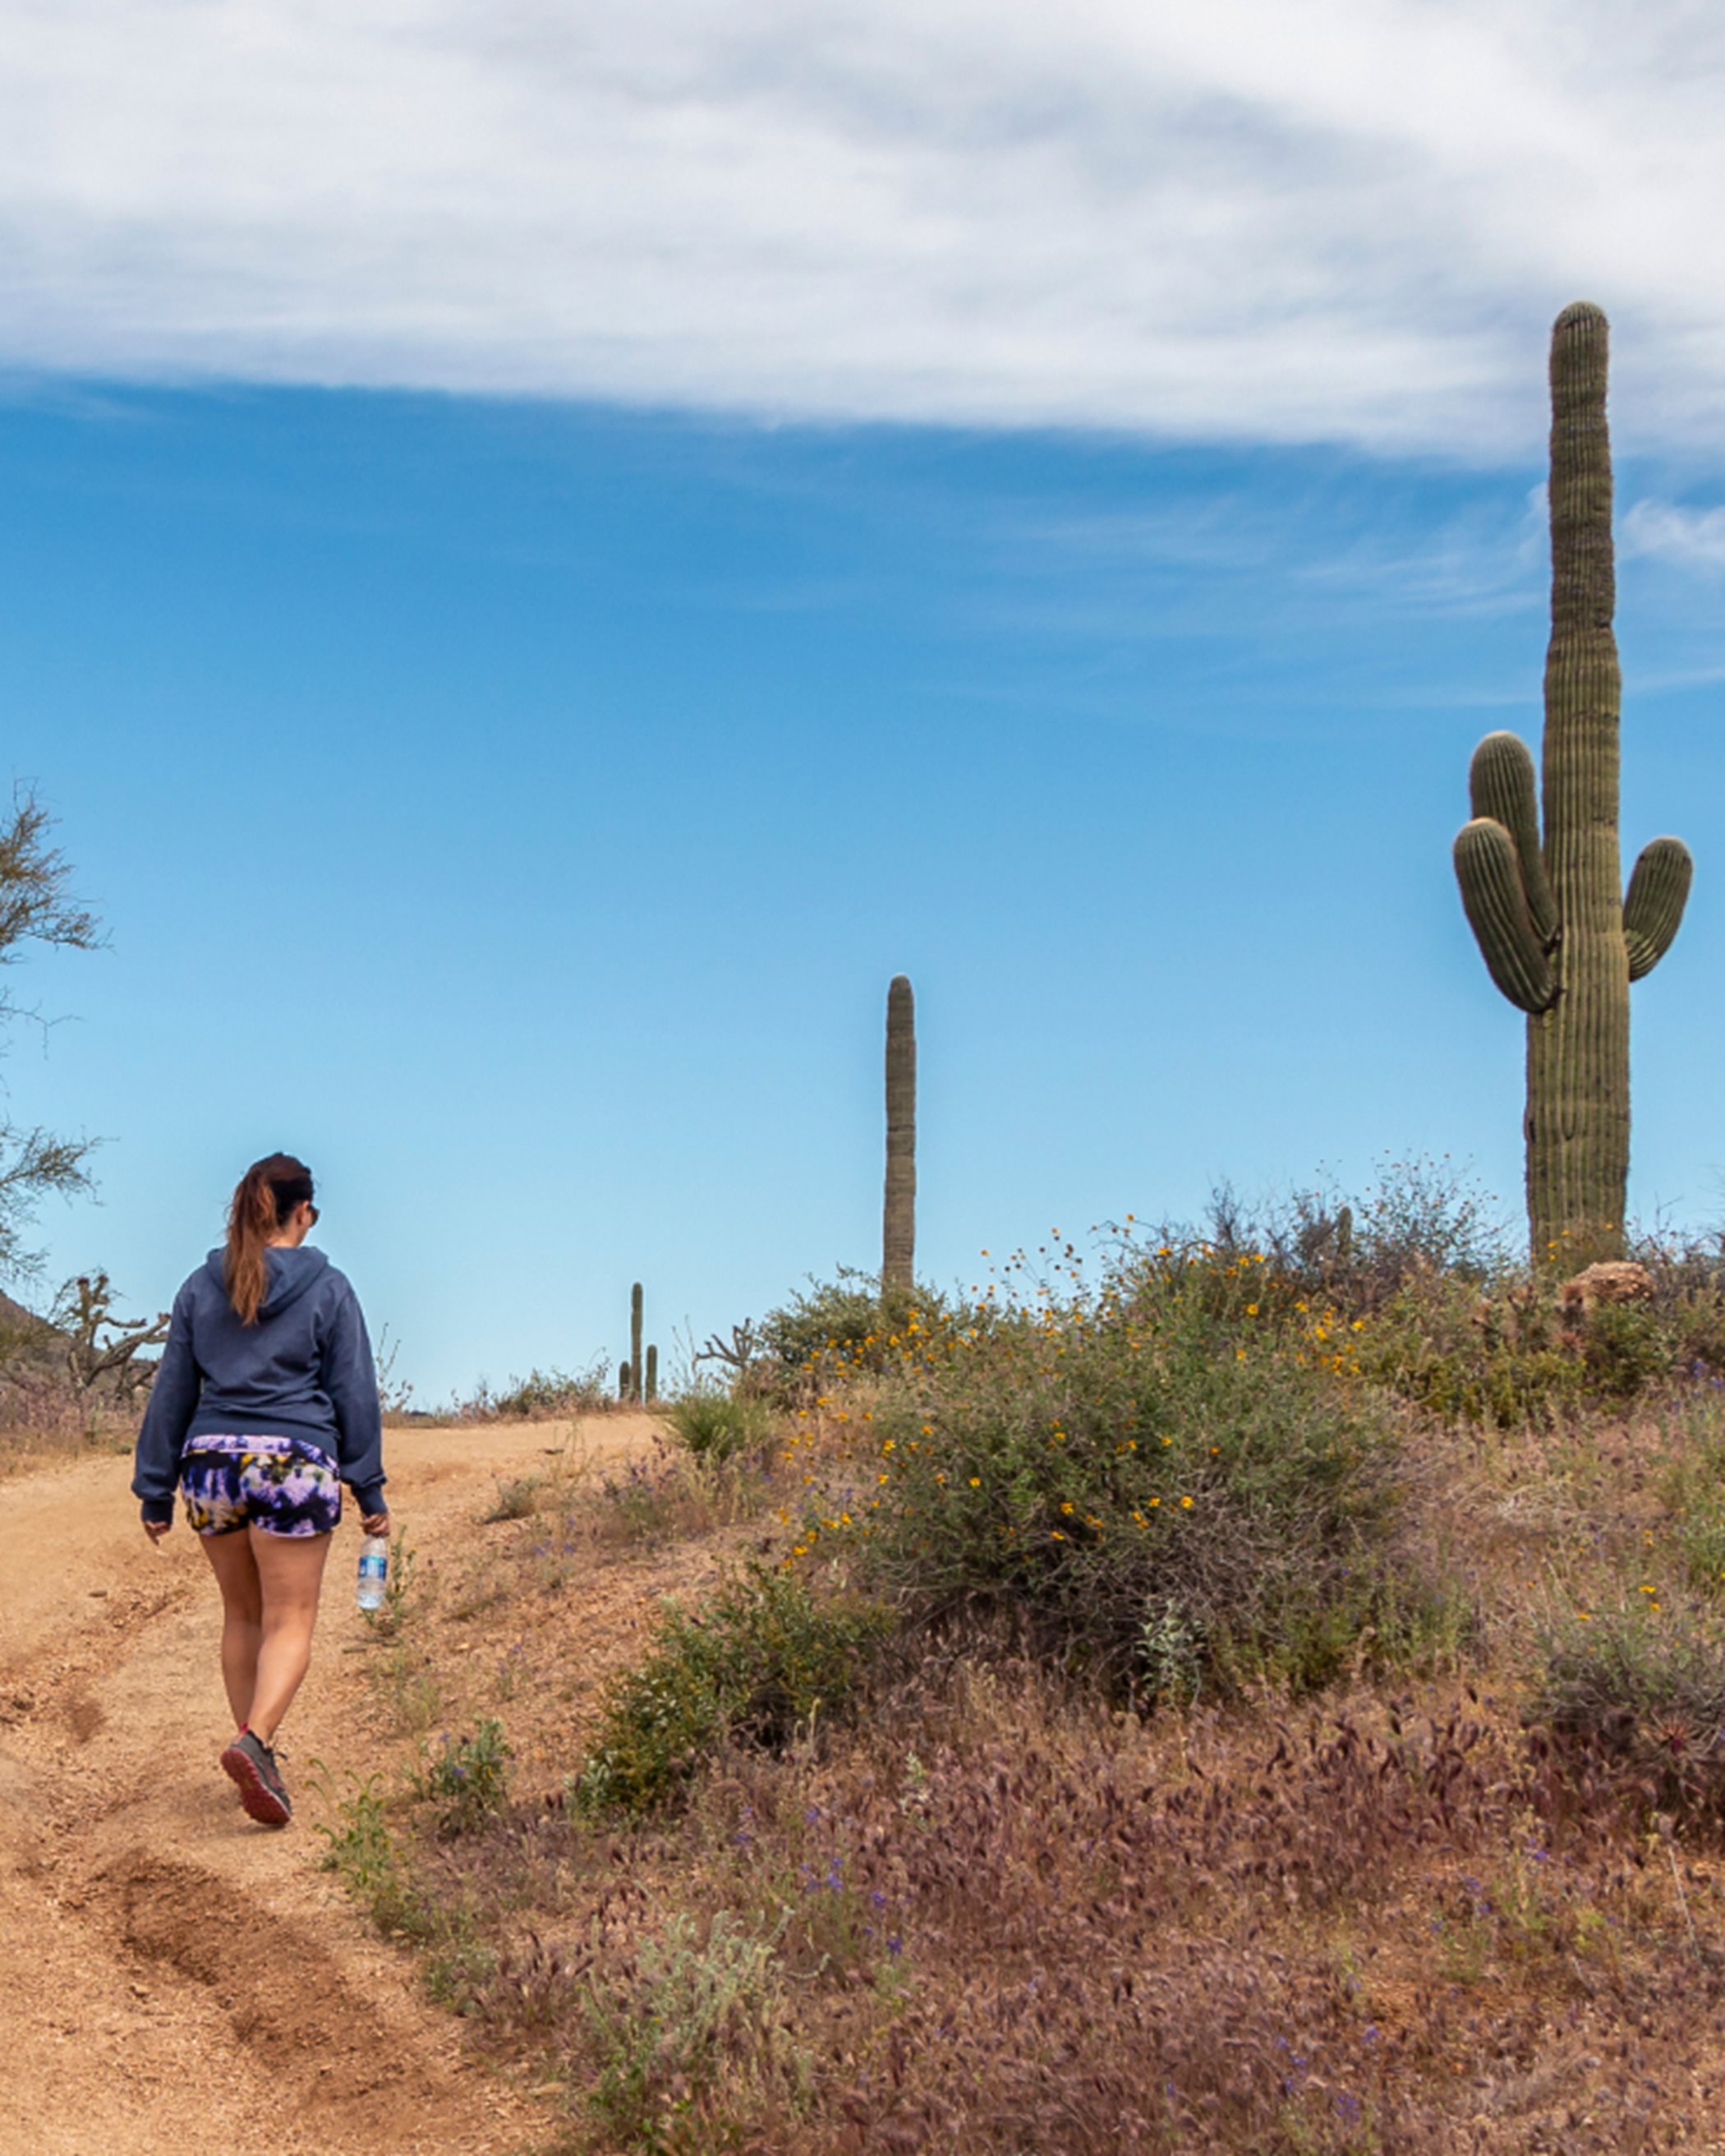 Woman hiking on desert path with cacti